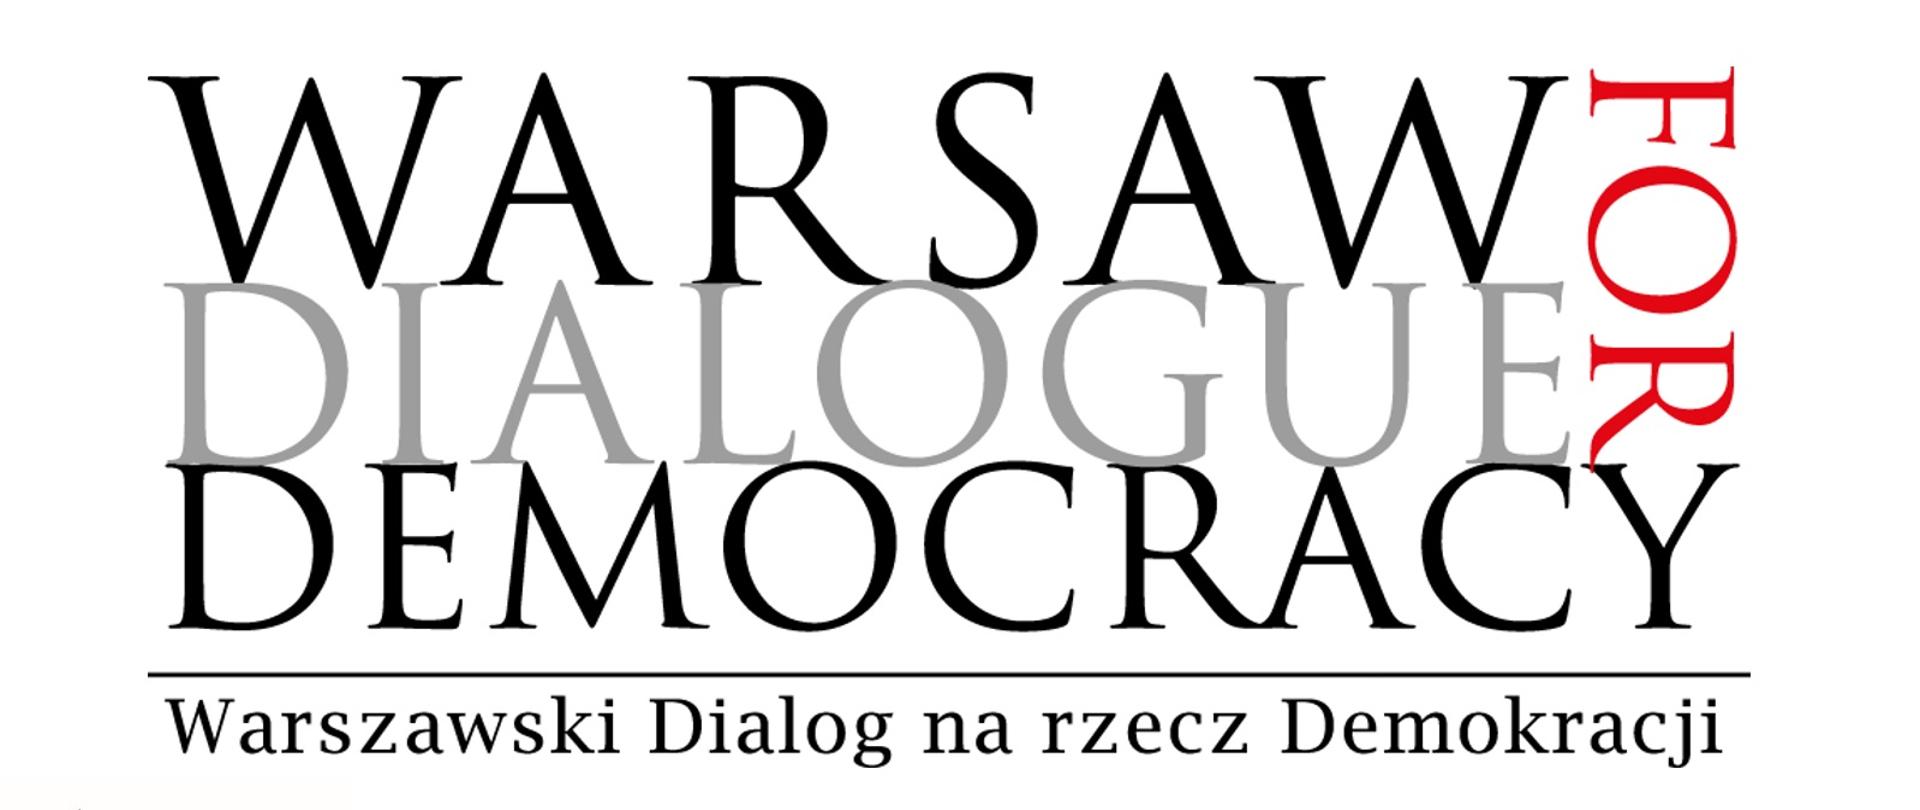 Warsaw Dialogue for Democracy